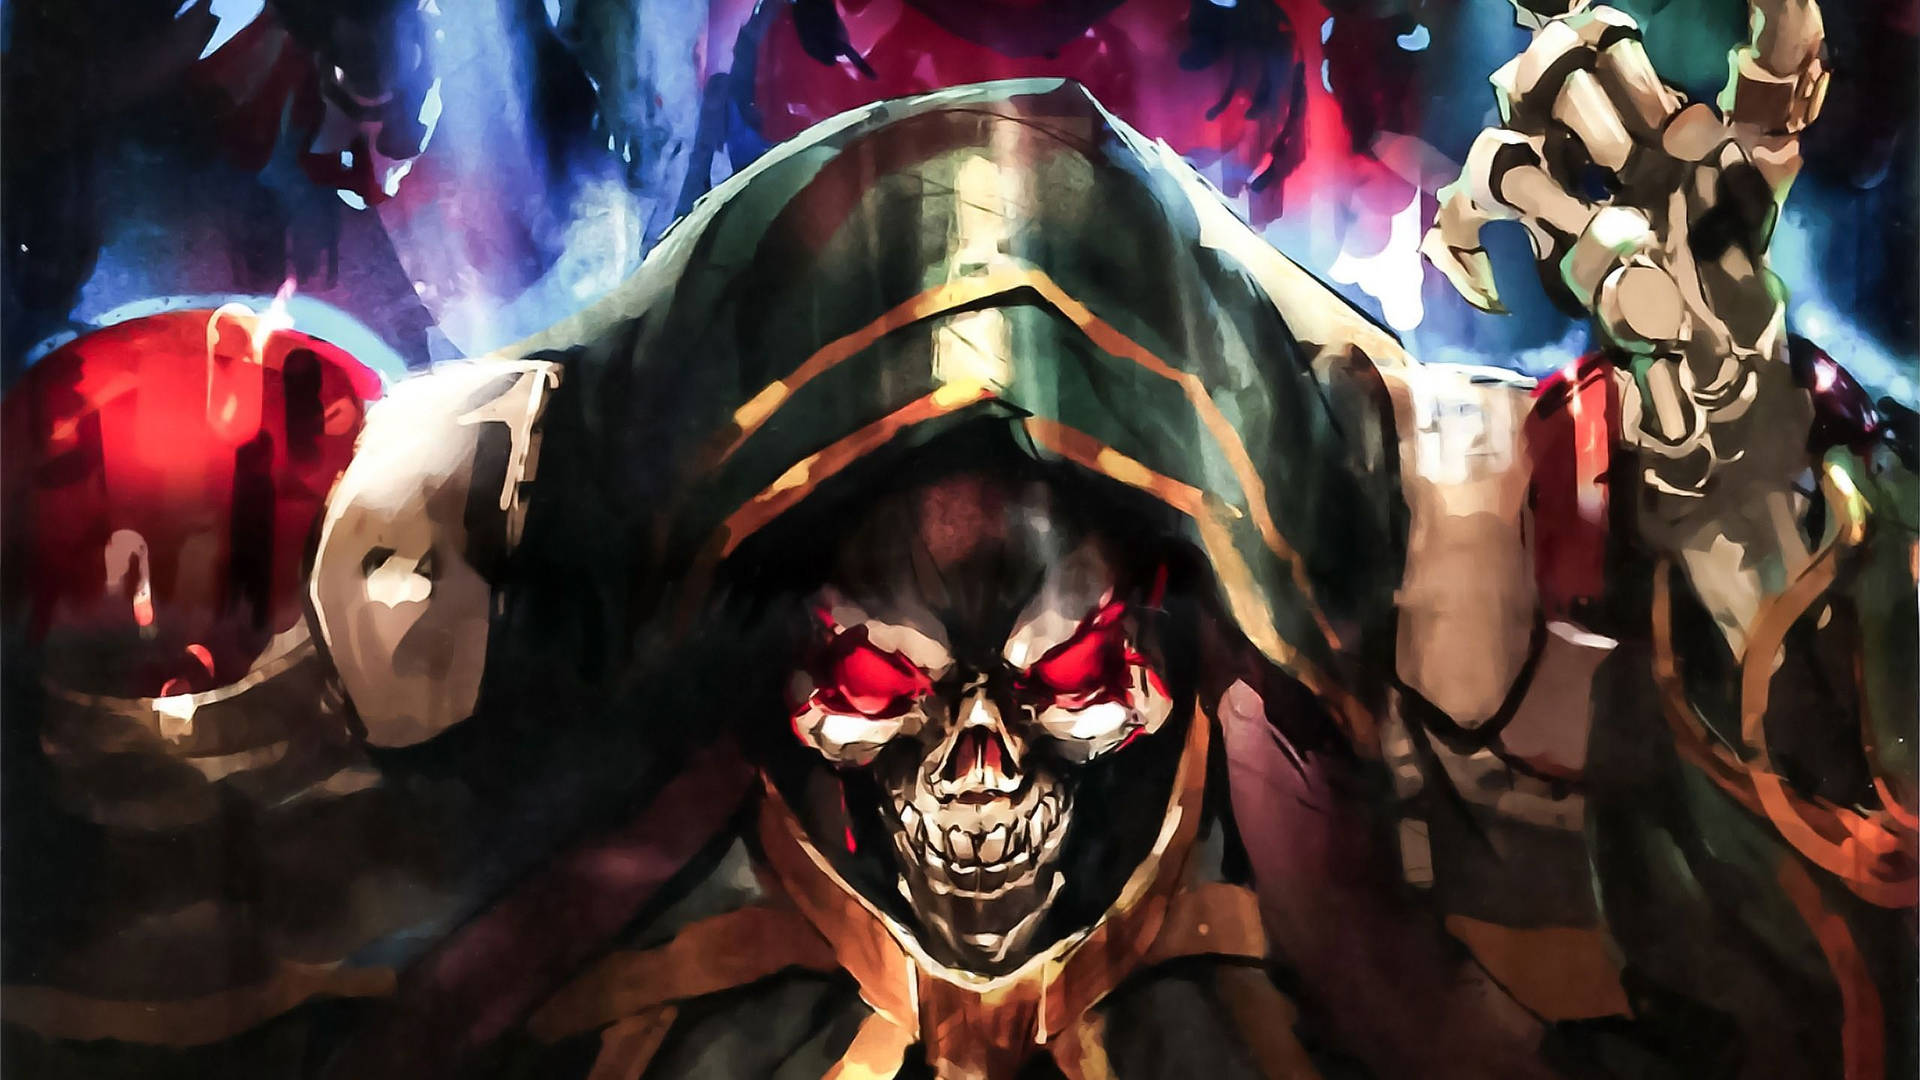 Ainz Ooal Gown from Overlord in pastel art Wallpaper